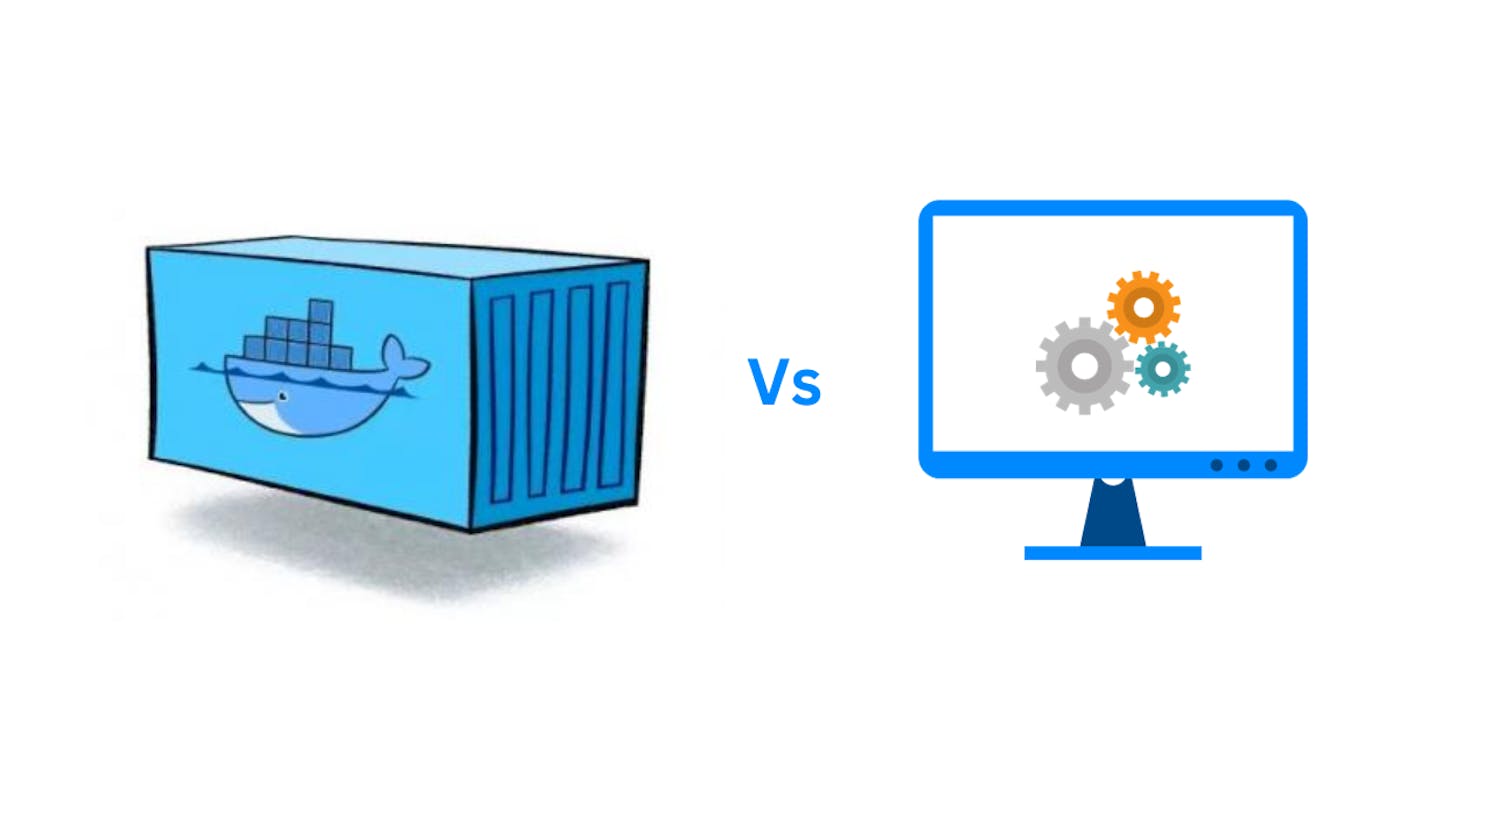 Containers vs virtual machines (VMs)